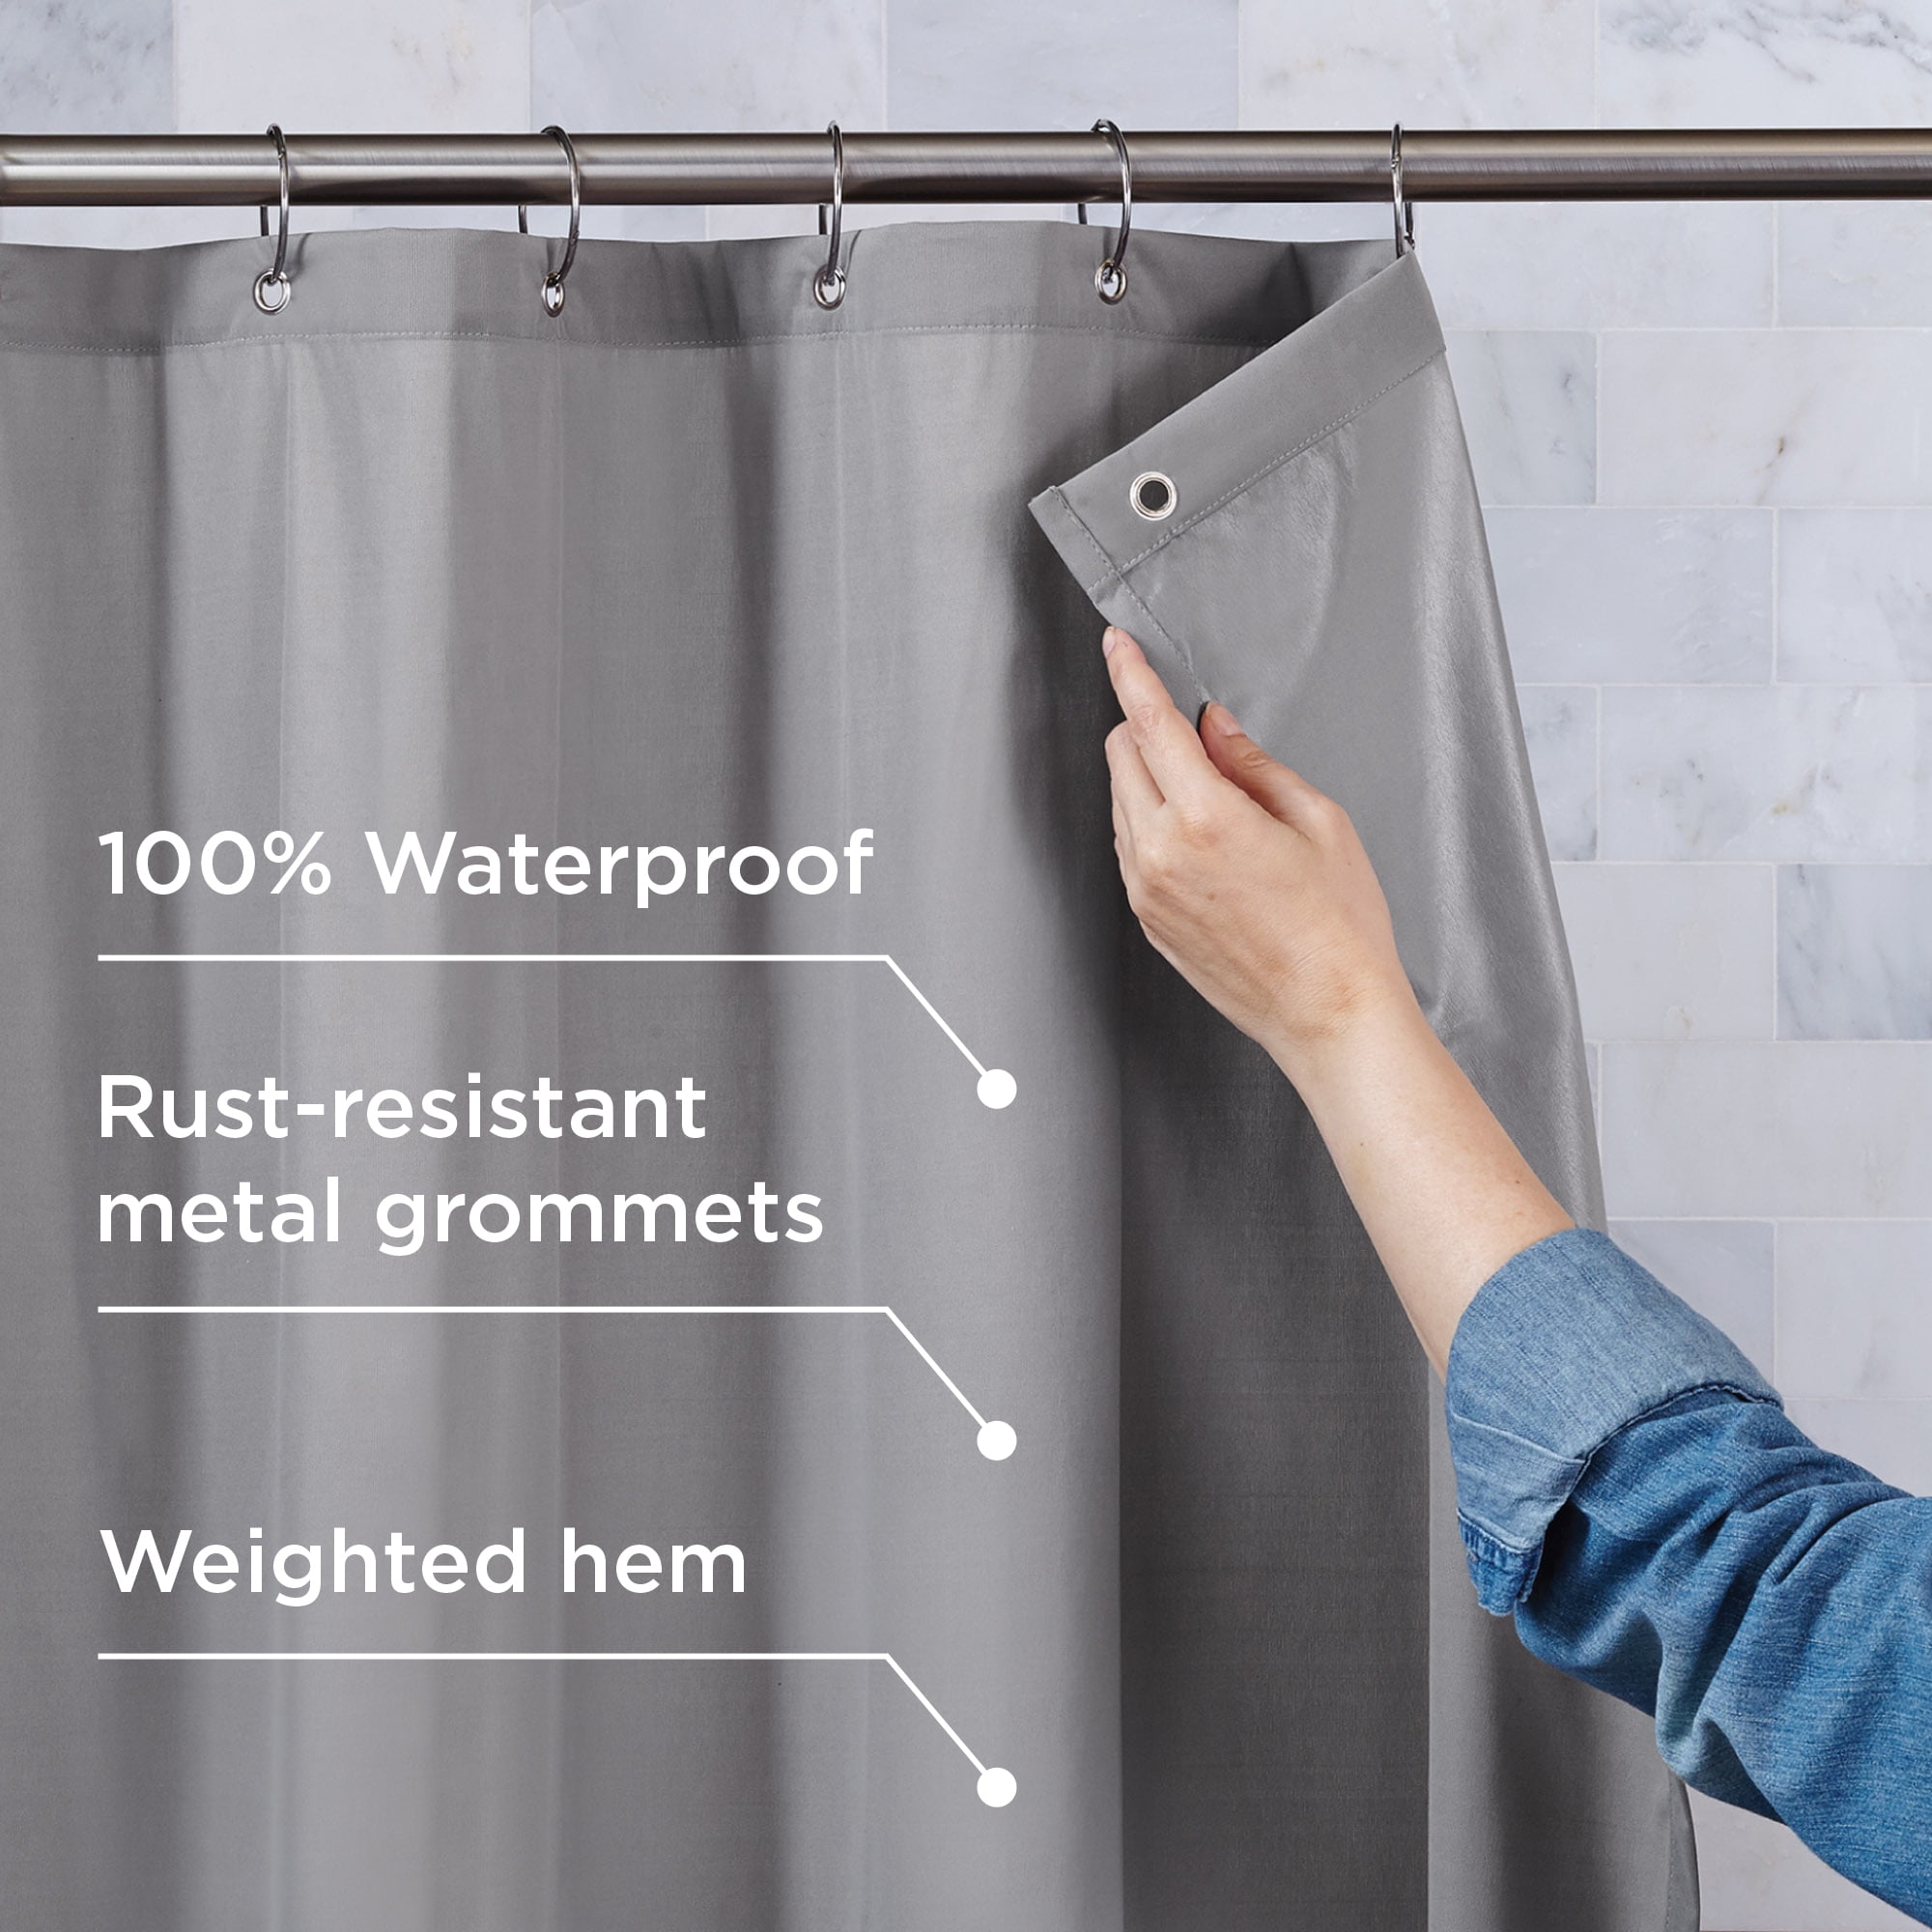 Waterproof Fabric Shower Curtain Or, Can You Use A Fabric Shower Curtain Without Liner